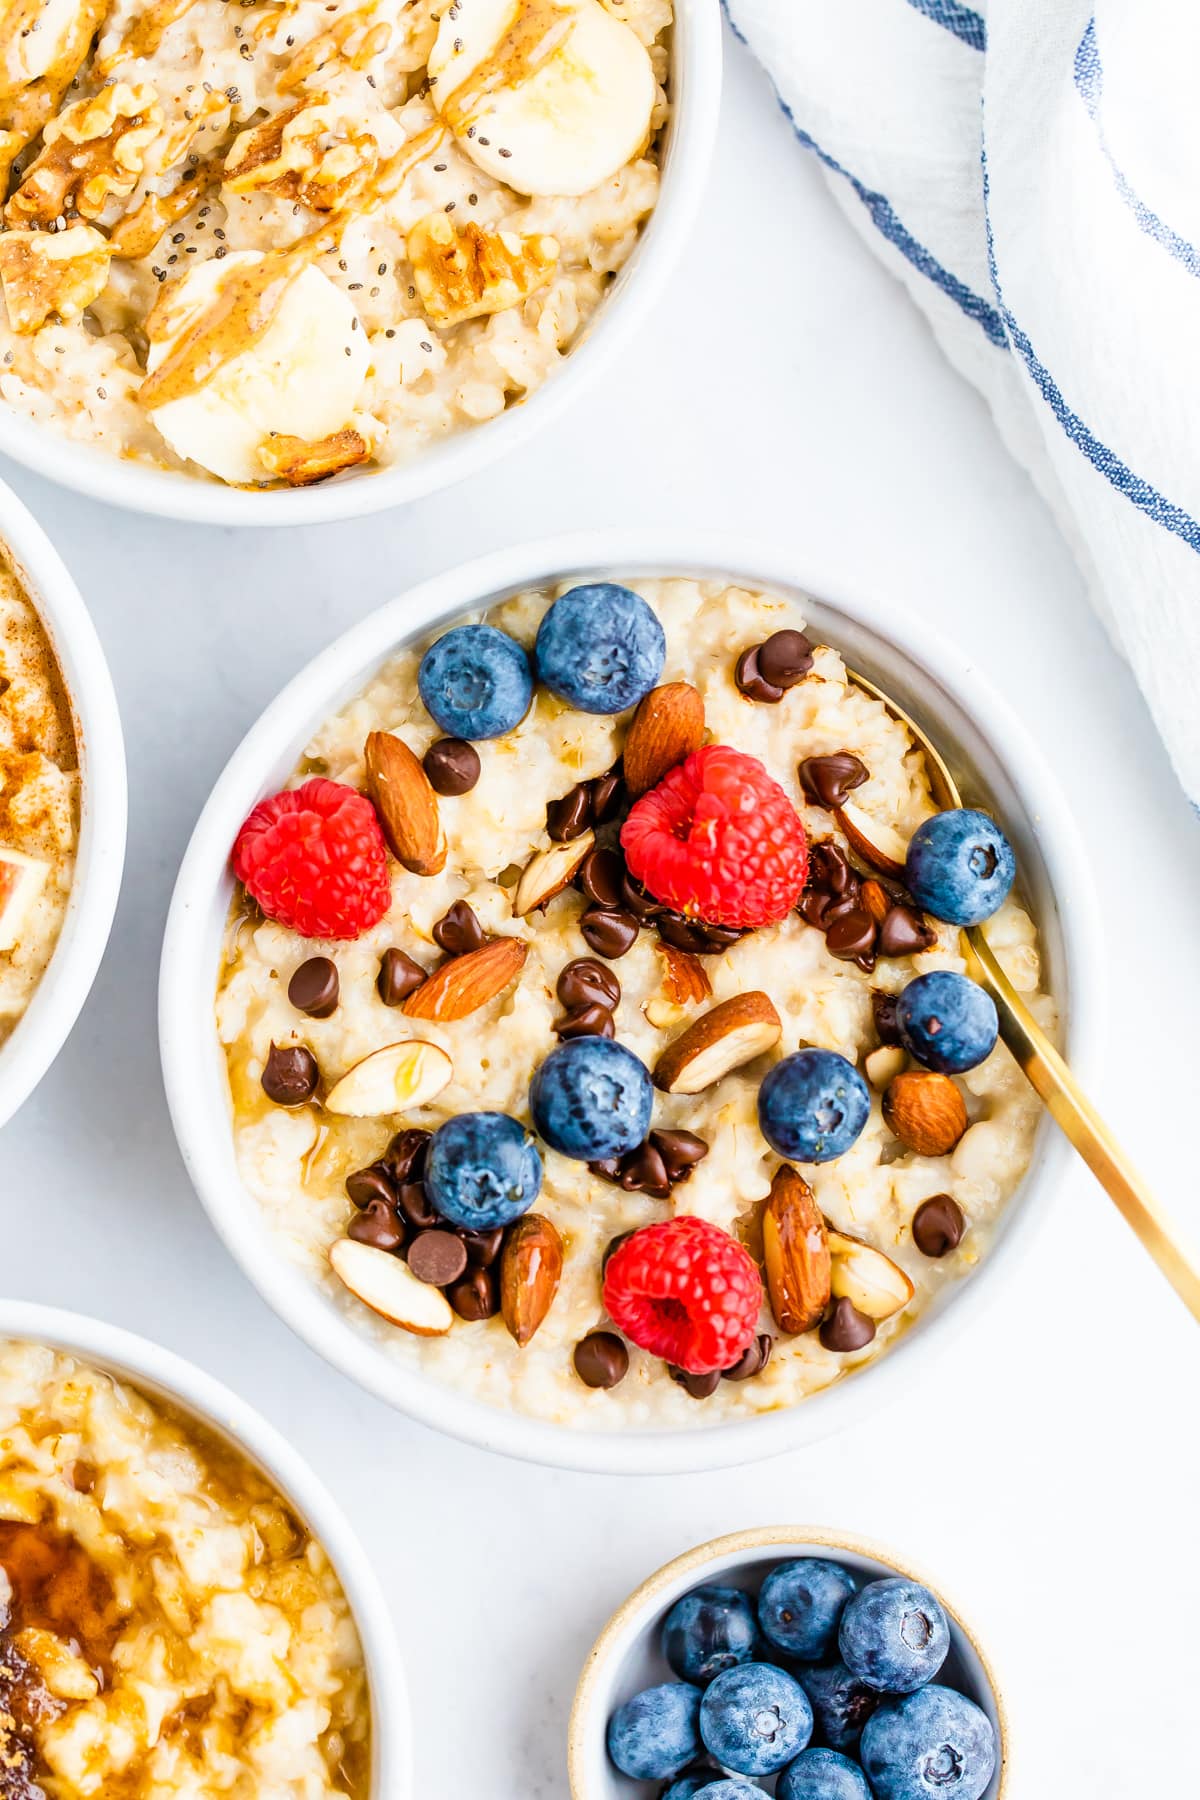 Best Low Calorie Oatmeal Recipes : The 50 Best Oatmeal Recipes On The